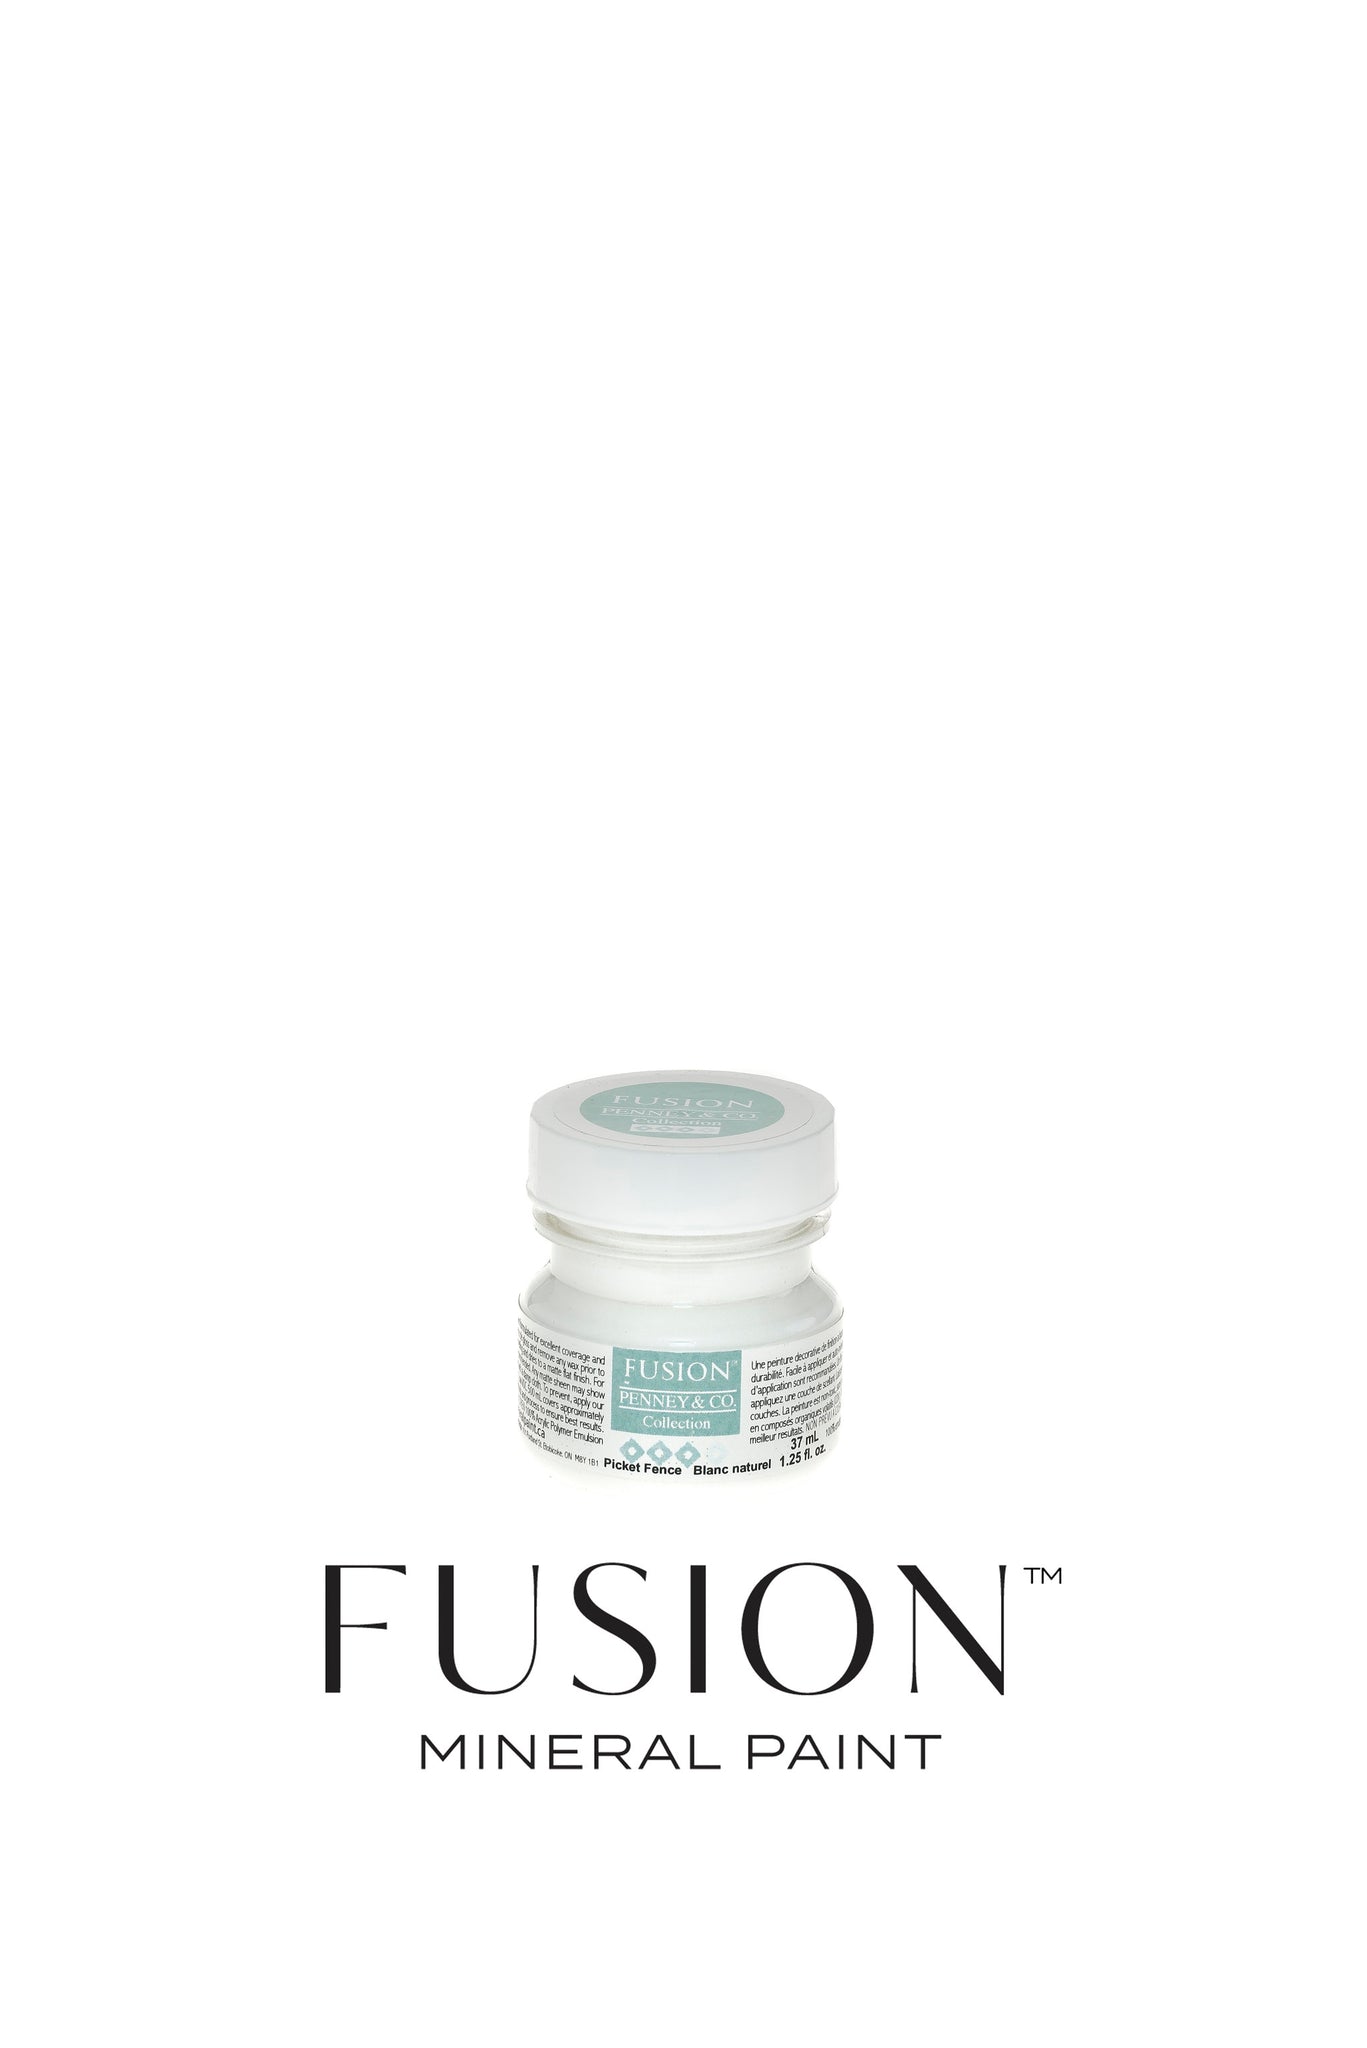 1 Fusion Mineral Paint - Small Tester Size